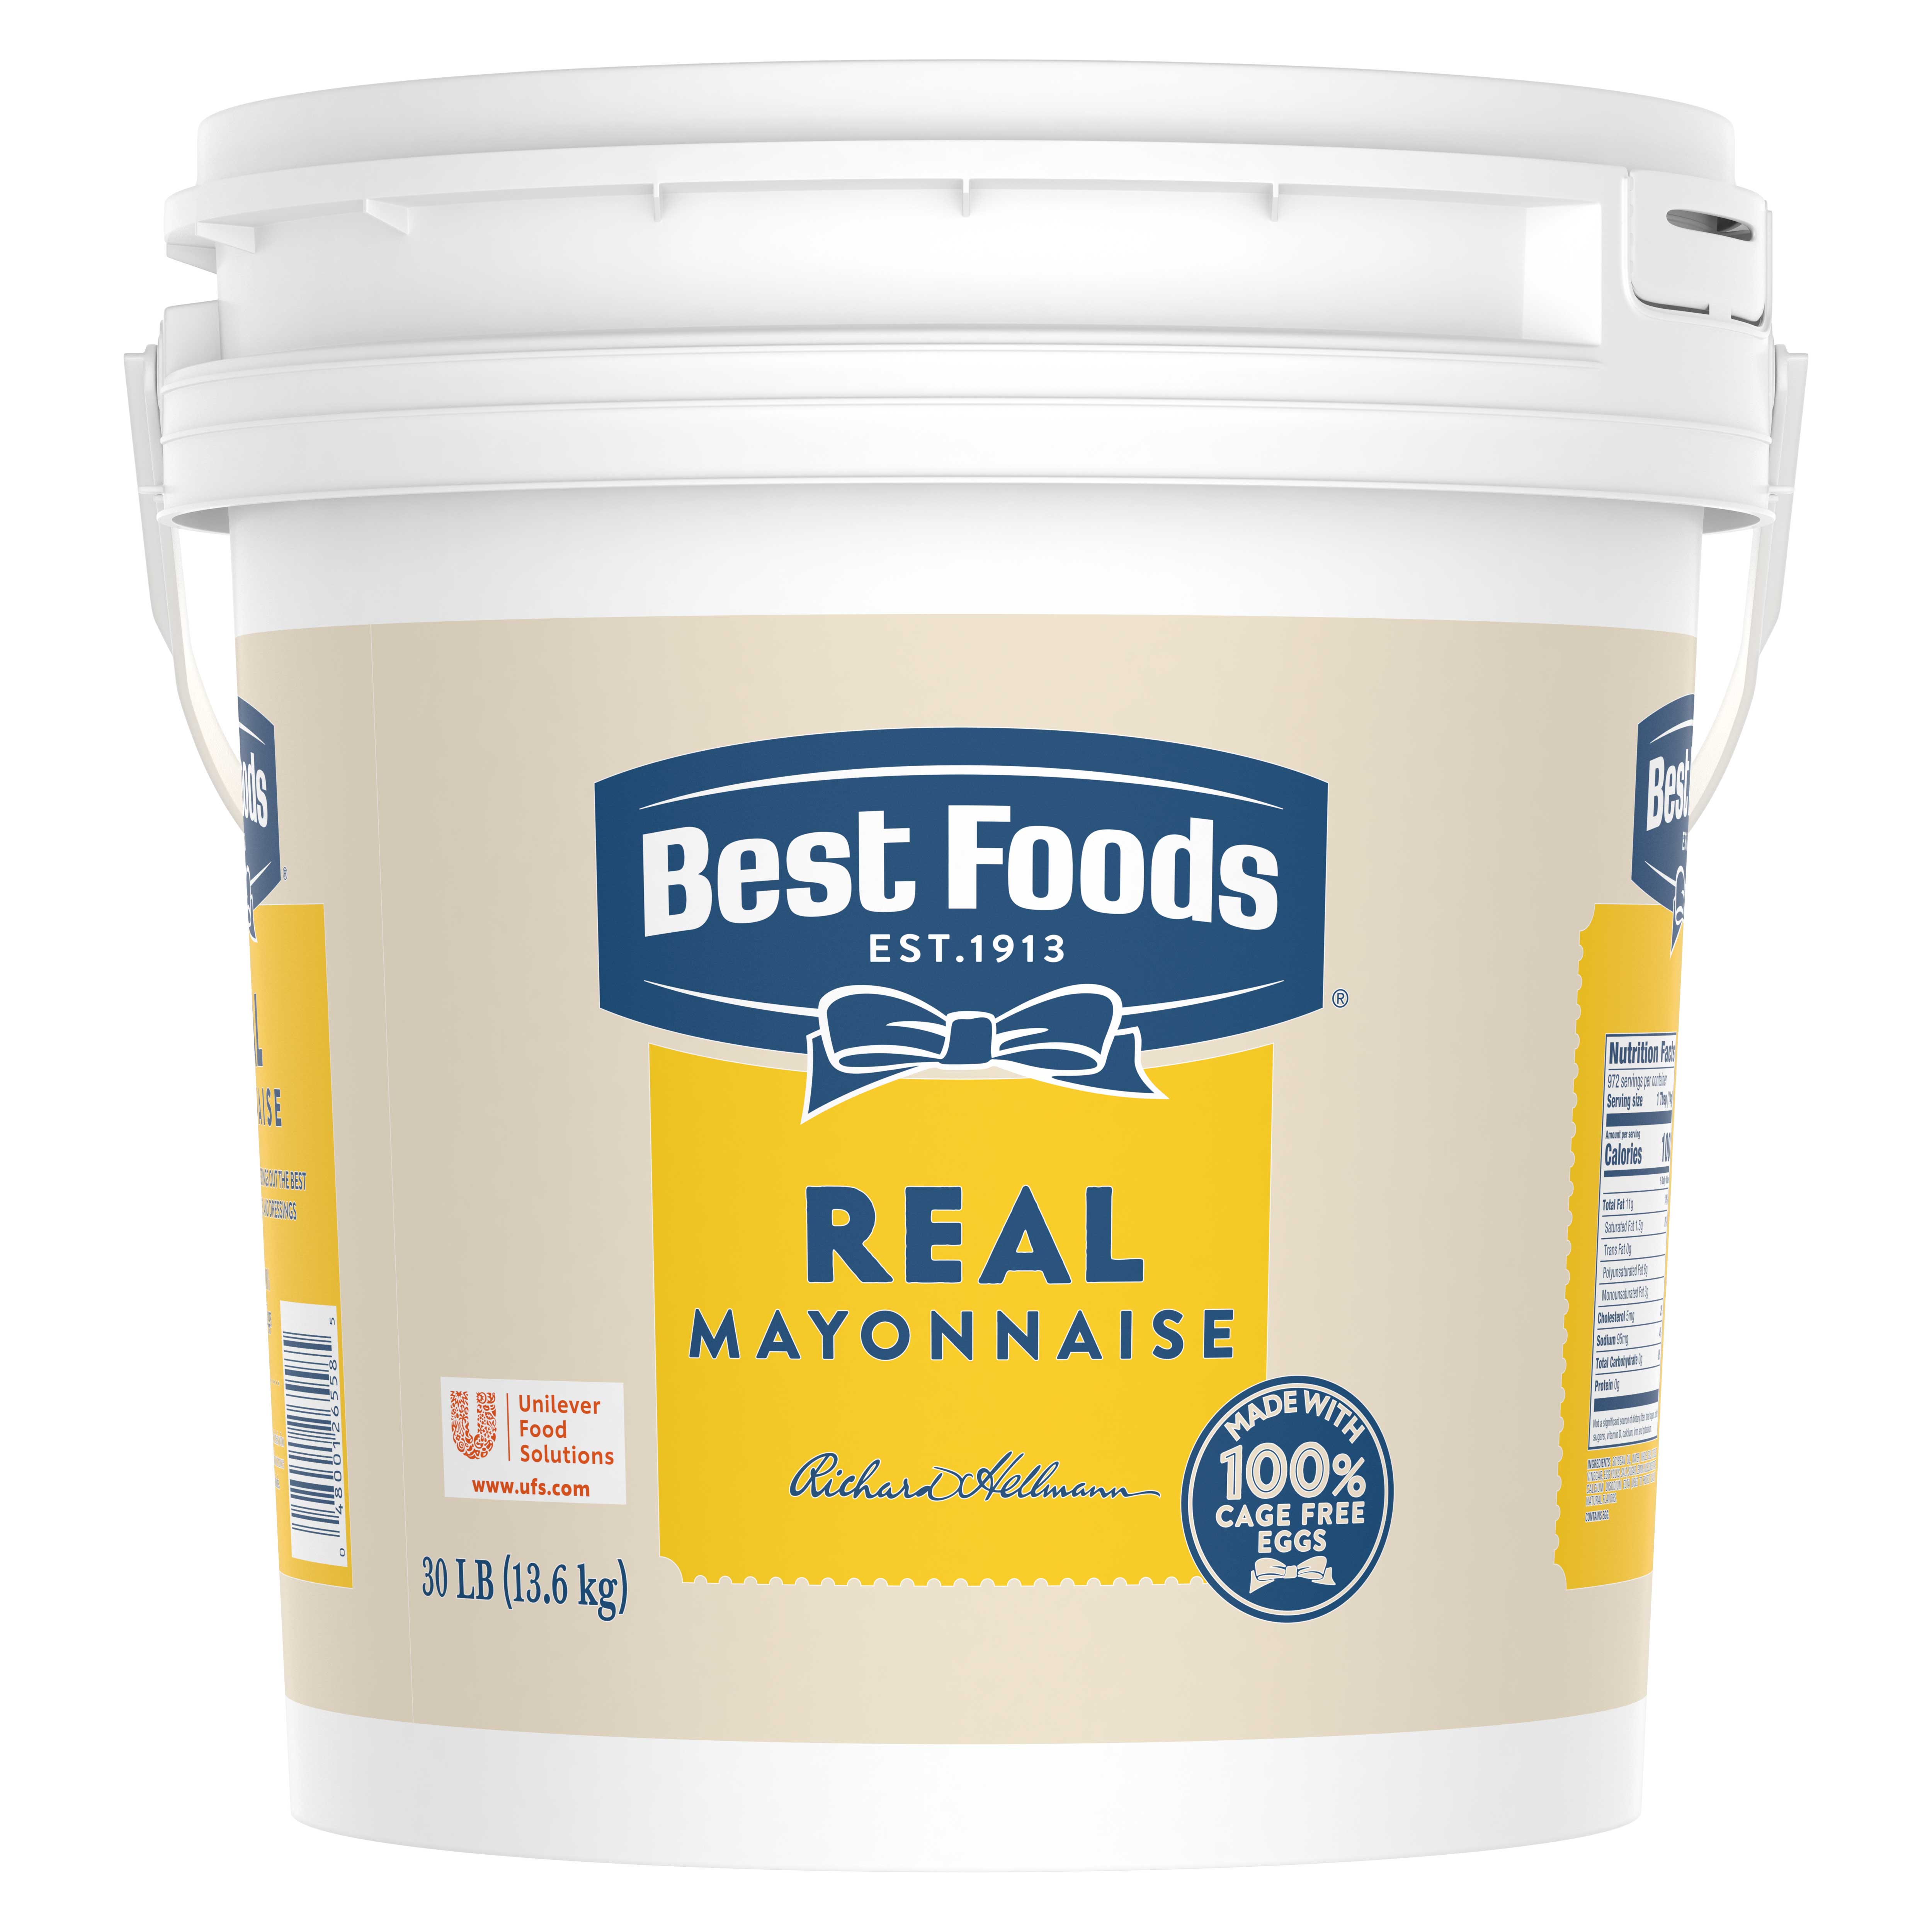 Best Foods Real Mayonnaise Pail, 30 Pound